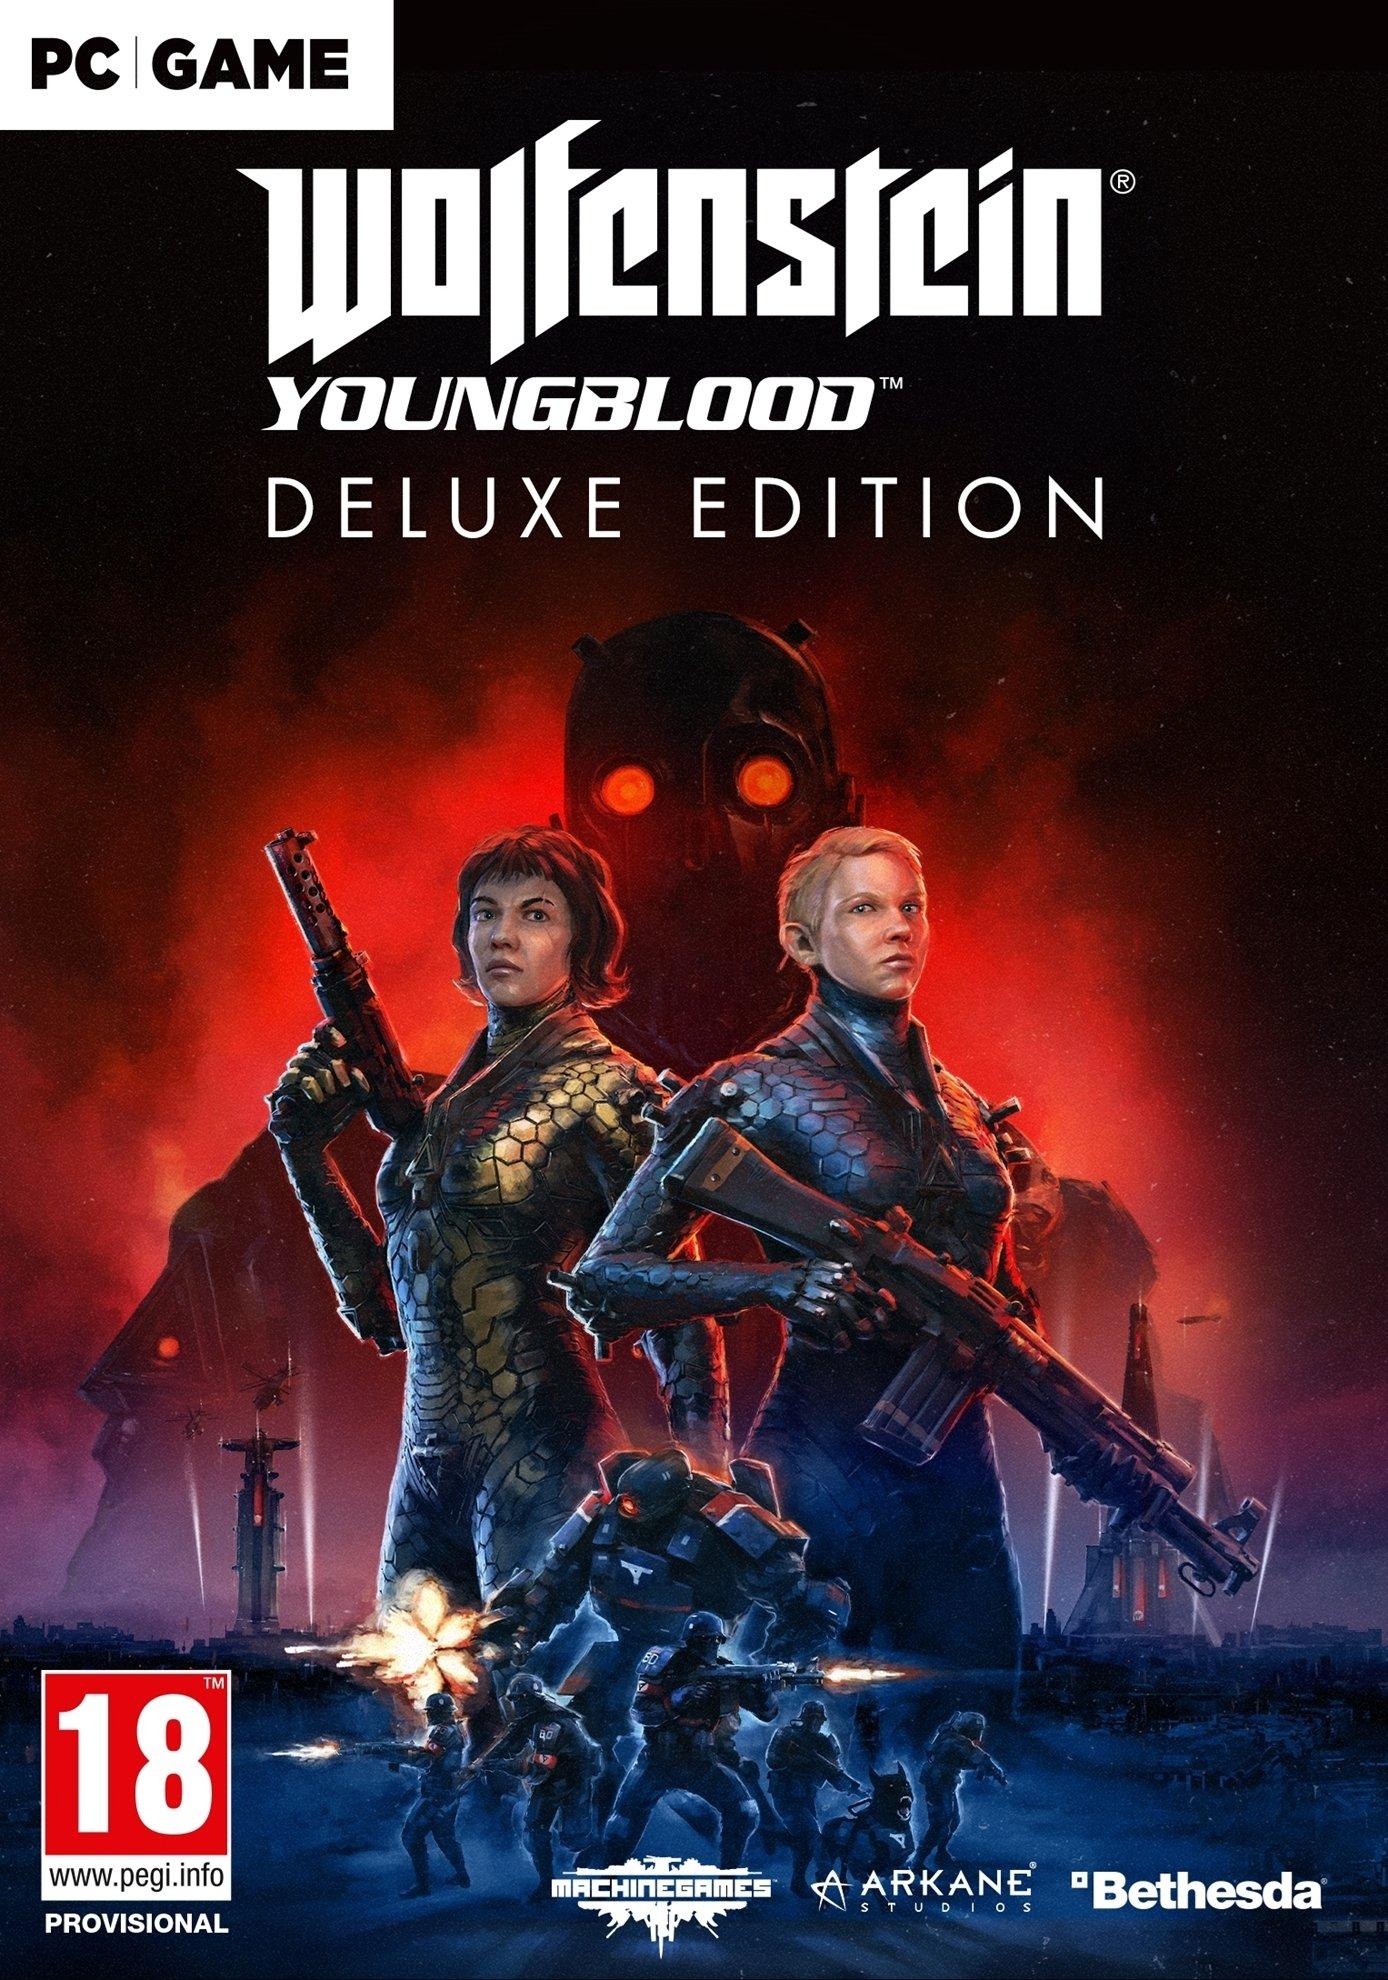 Wolfenstein®: Youngblood™ Deluxe Edition - New | Region Lock 3 (661cbe45-12d3-49c6-88ed-87f57716d0a9)